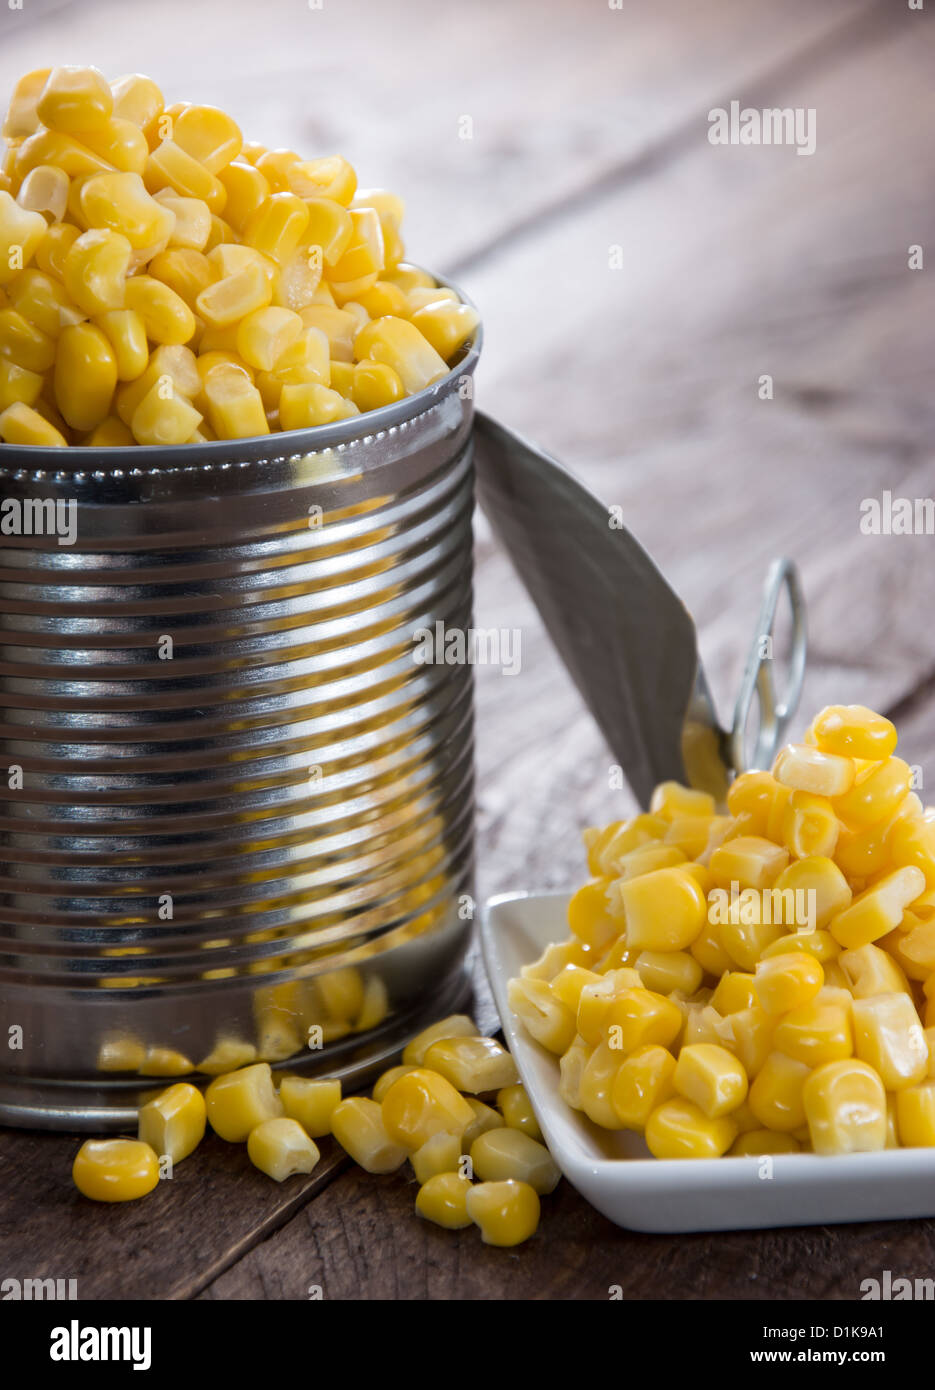 Canned Corn on a wooden background Stock Photo